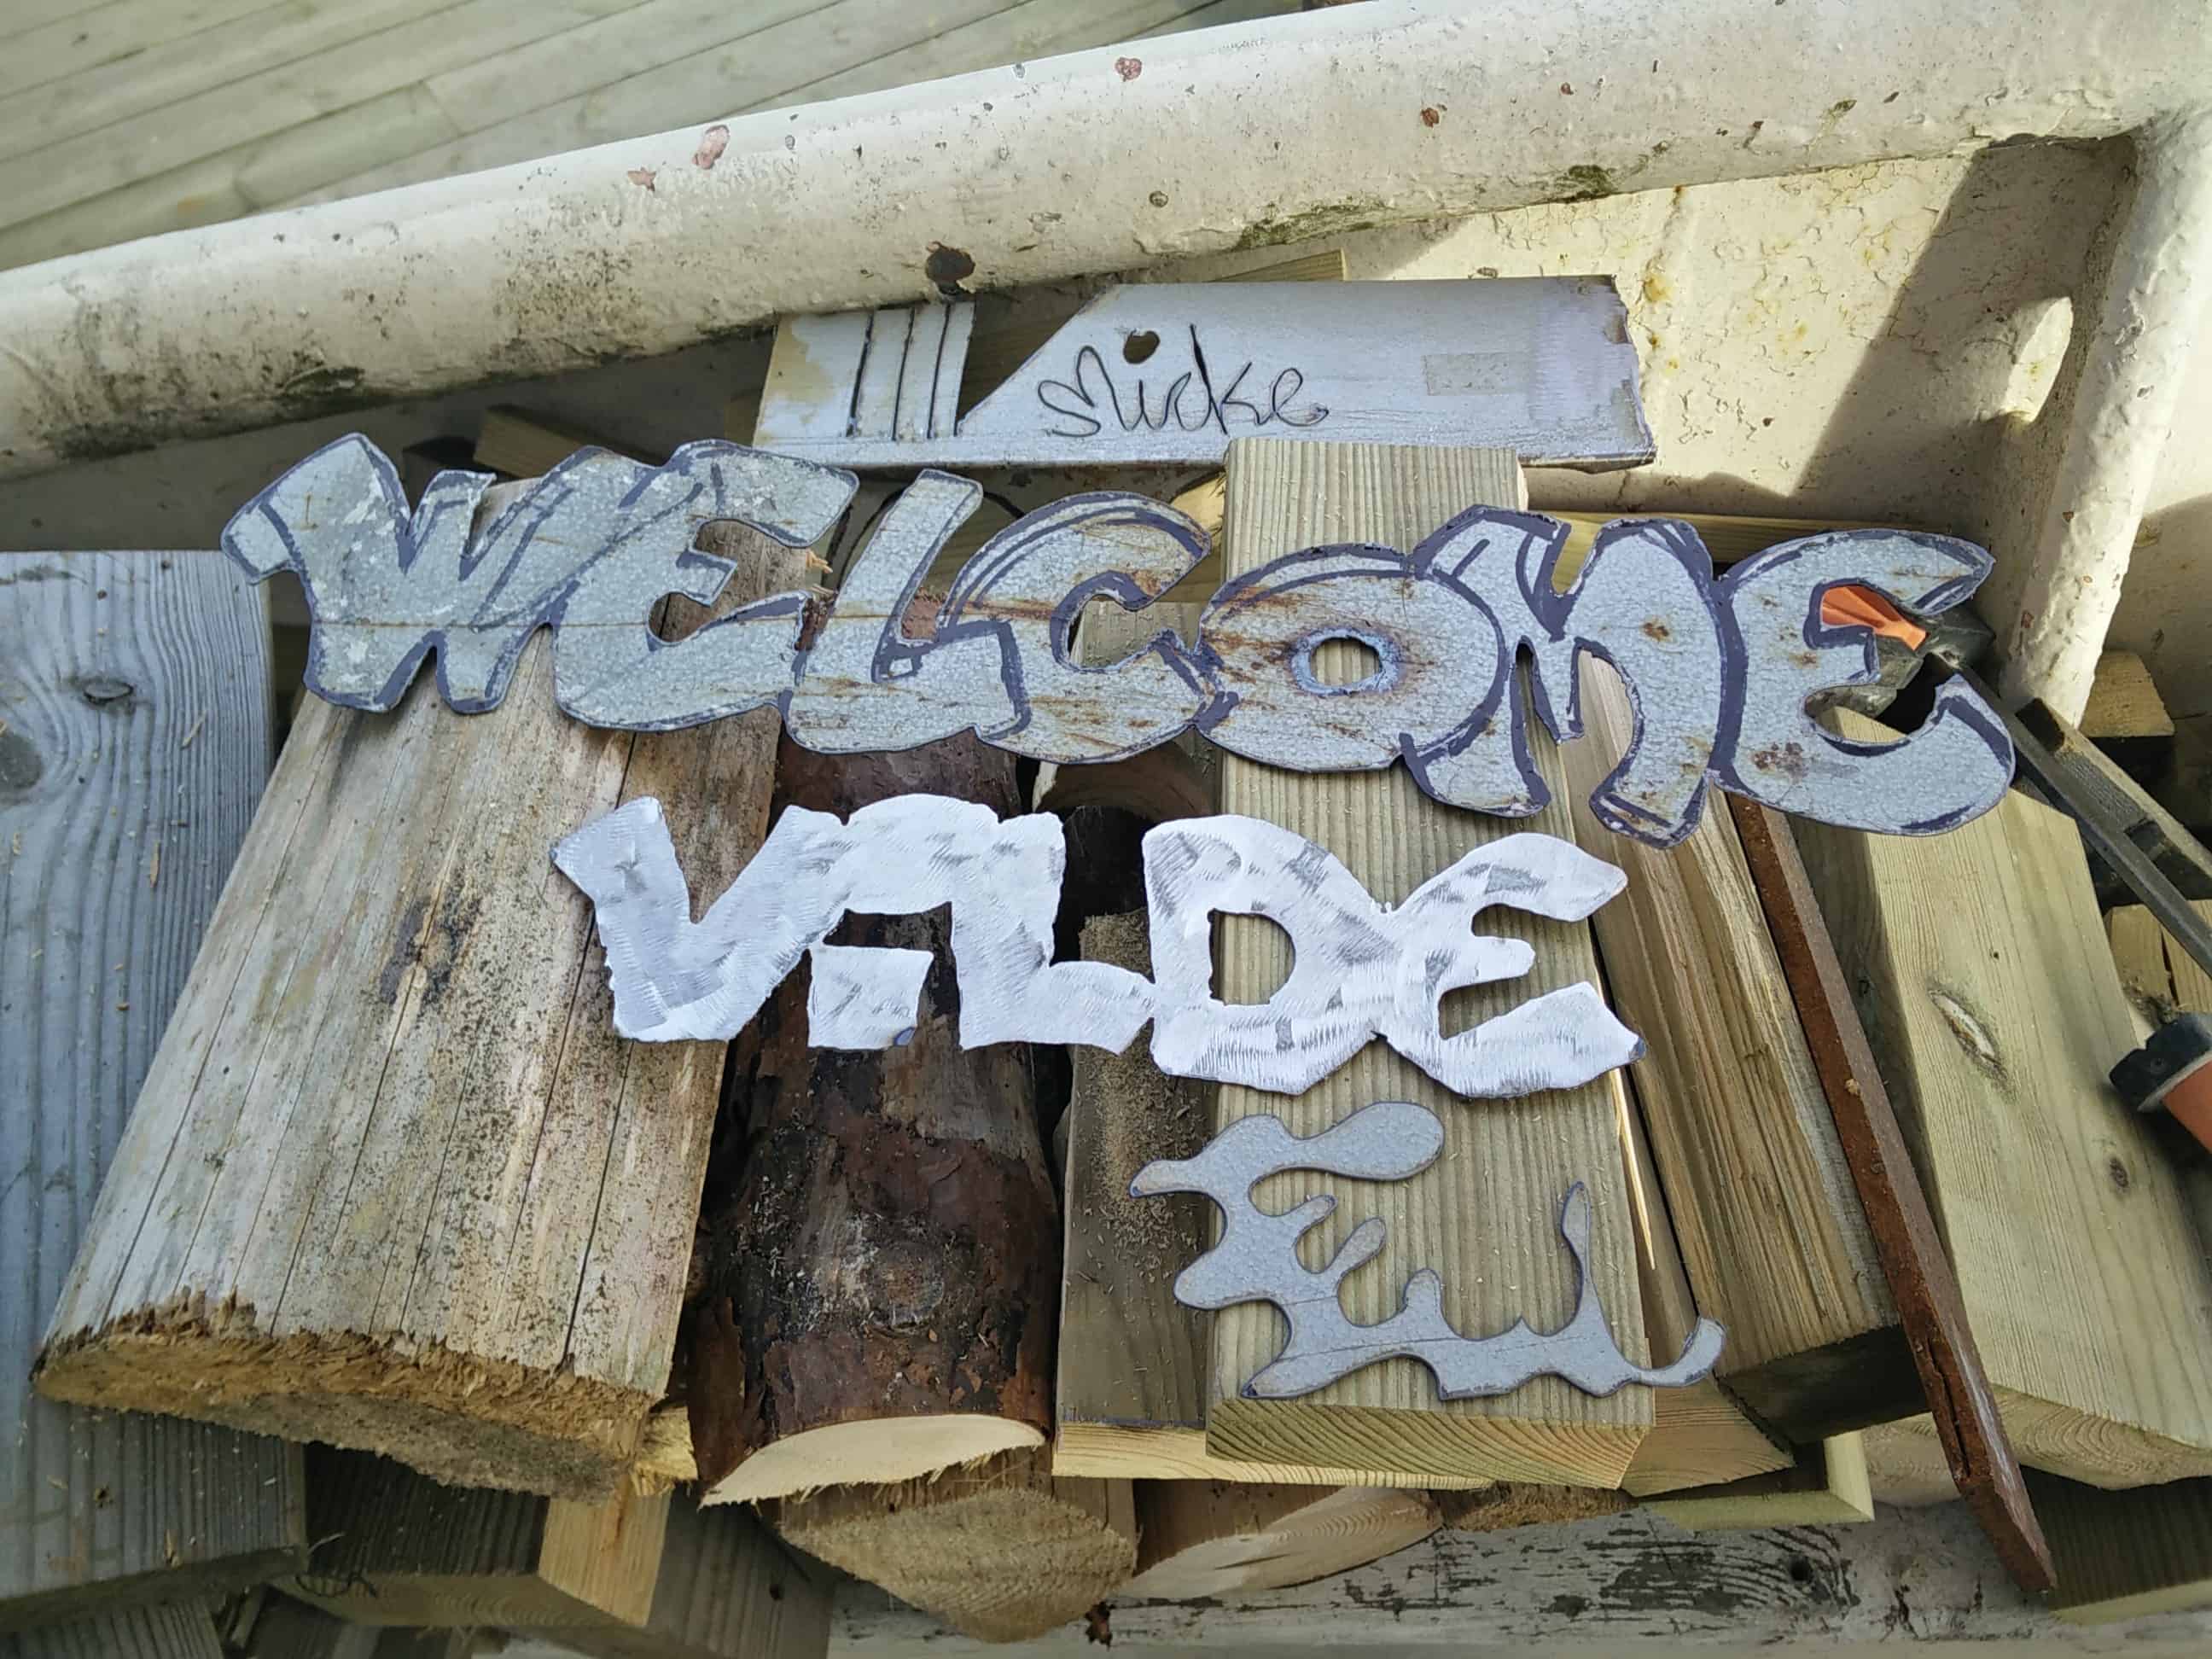 Welcome and Vilde signs made with the plasma cutter